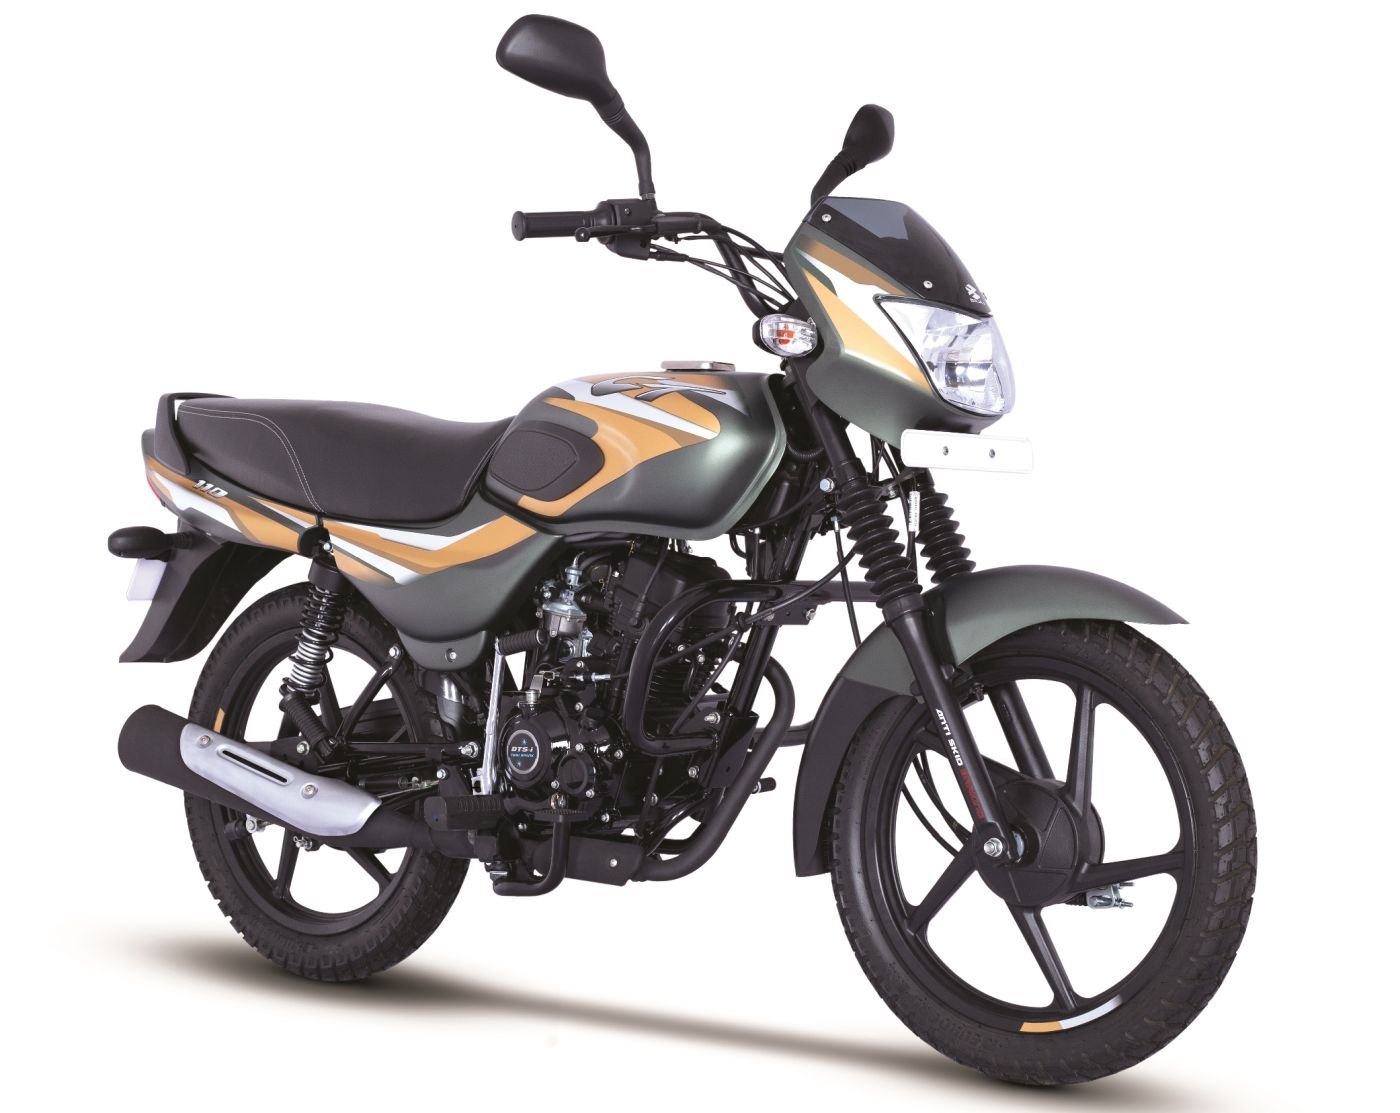 2019 Bajaj CT110 launched in India, Price Rs. 37997